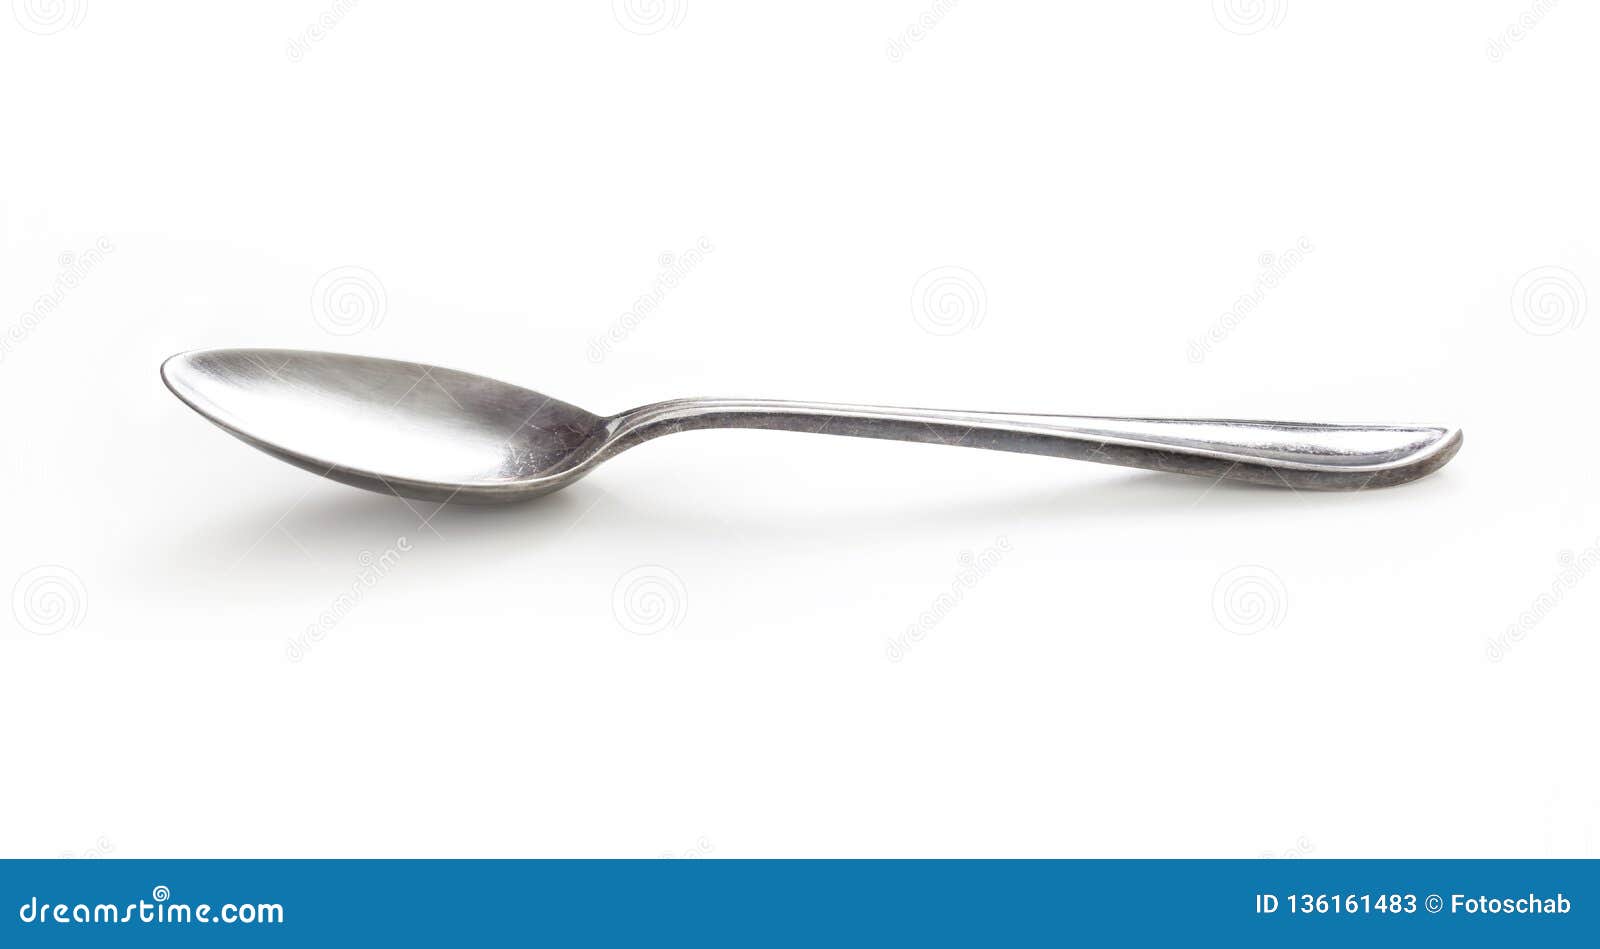 old silver spoon  on white with clipping path included